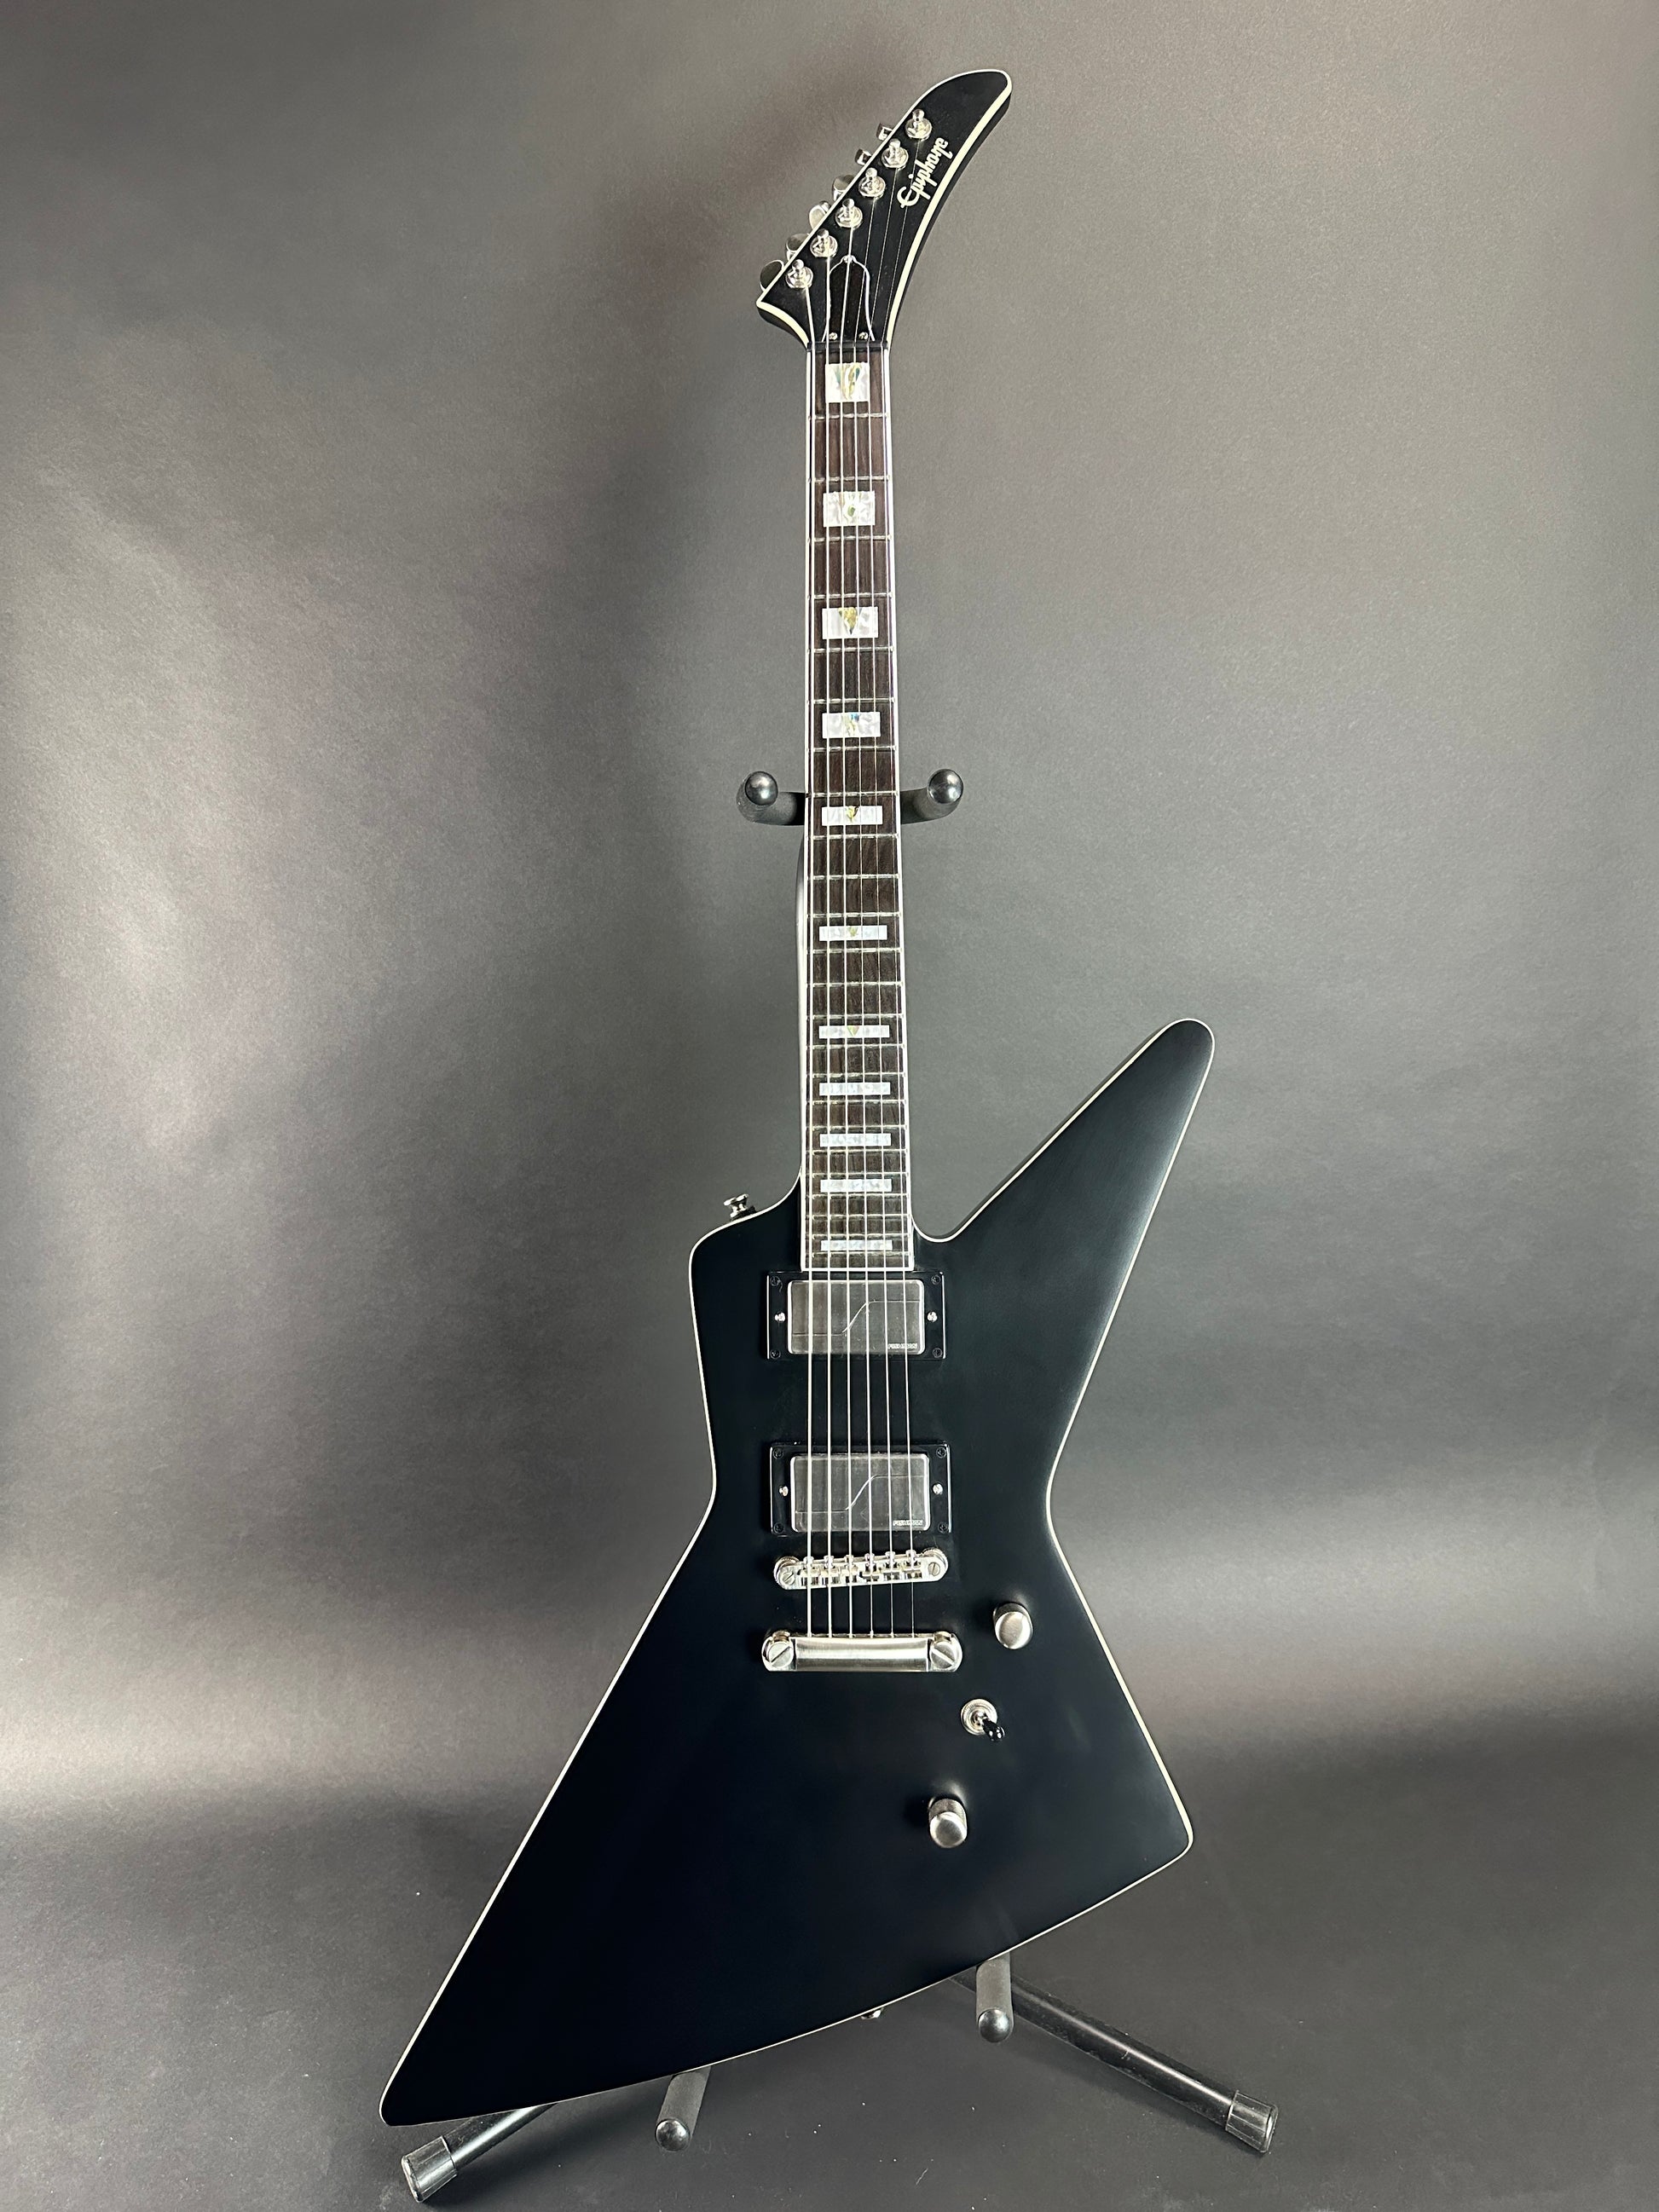 Full front of Used Epiphone Prophecy Extura Black.